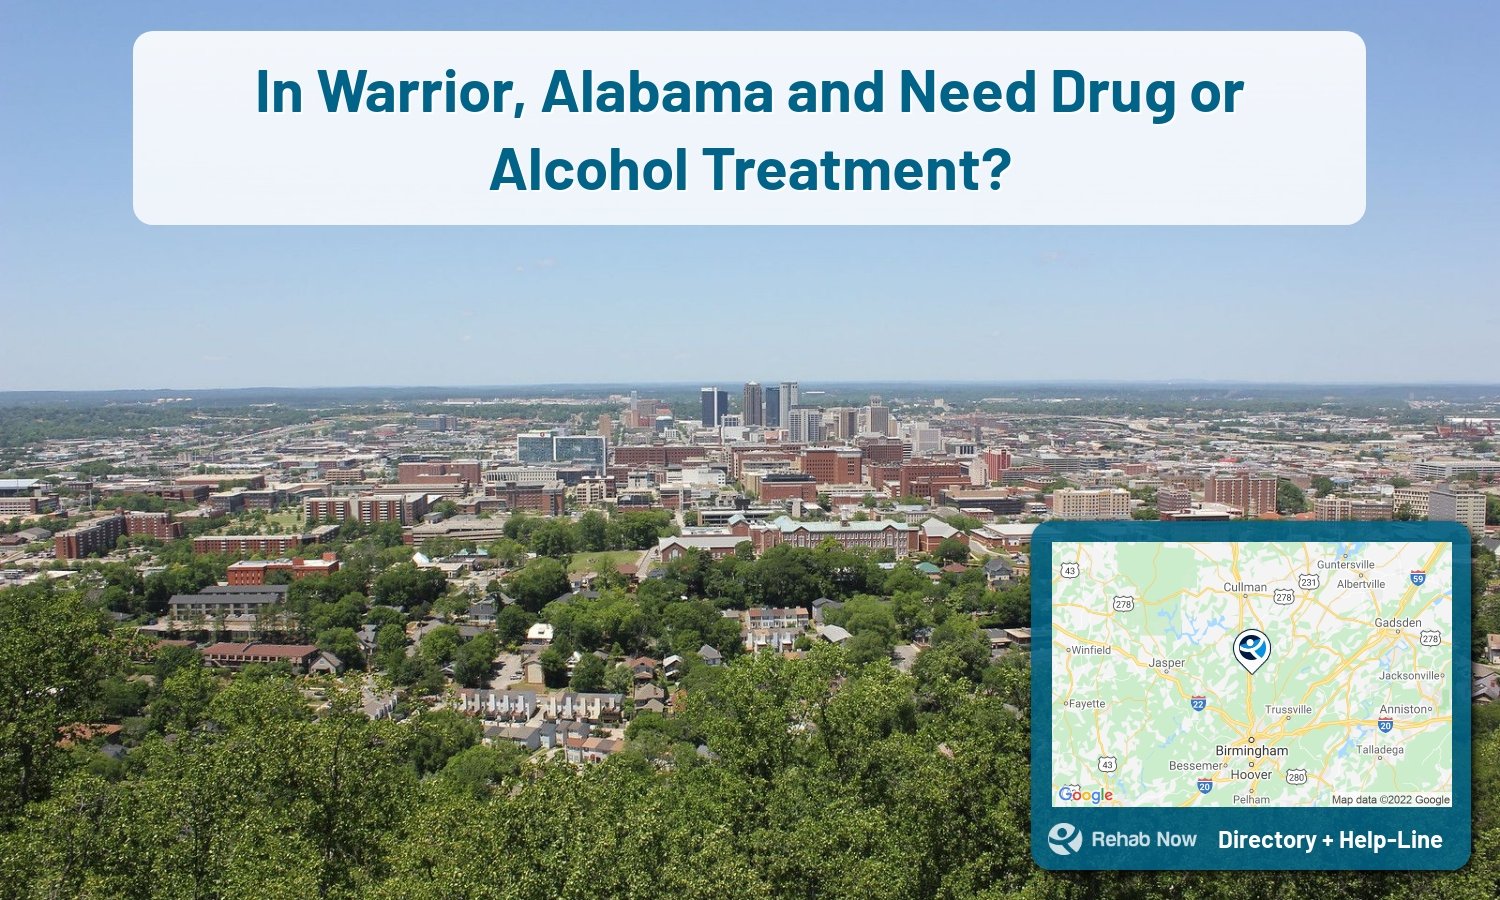 Let our expert counselors help find the best addiction treatment in Warrior, Alabama for you or a loved one now with a free call to our hotline.